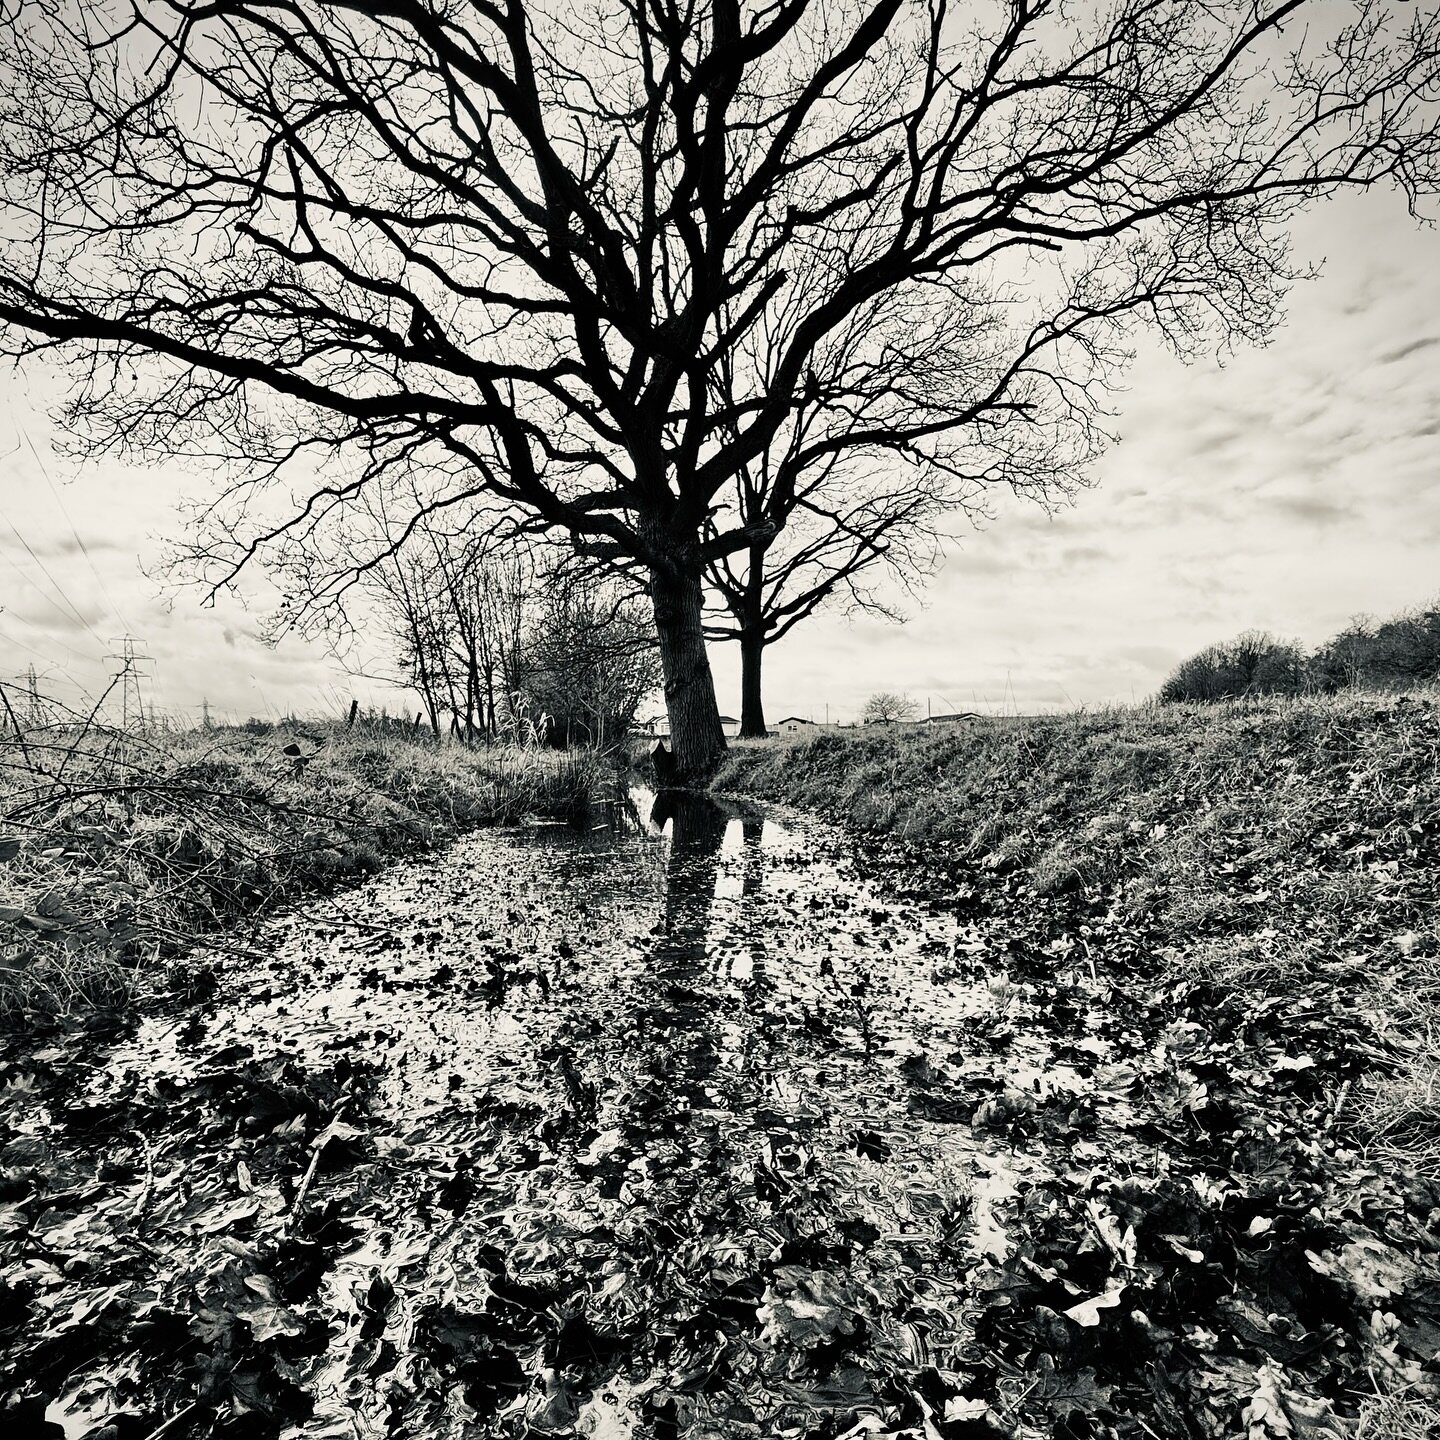 Morning run, distracted by shapes #treephotography #blackandwhite #trailrunning